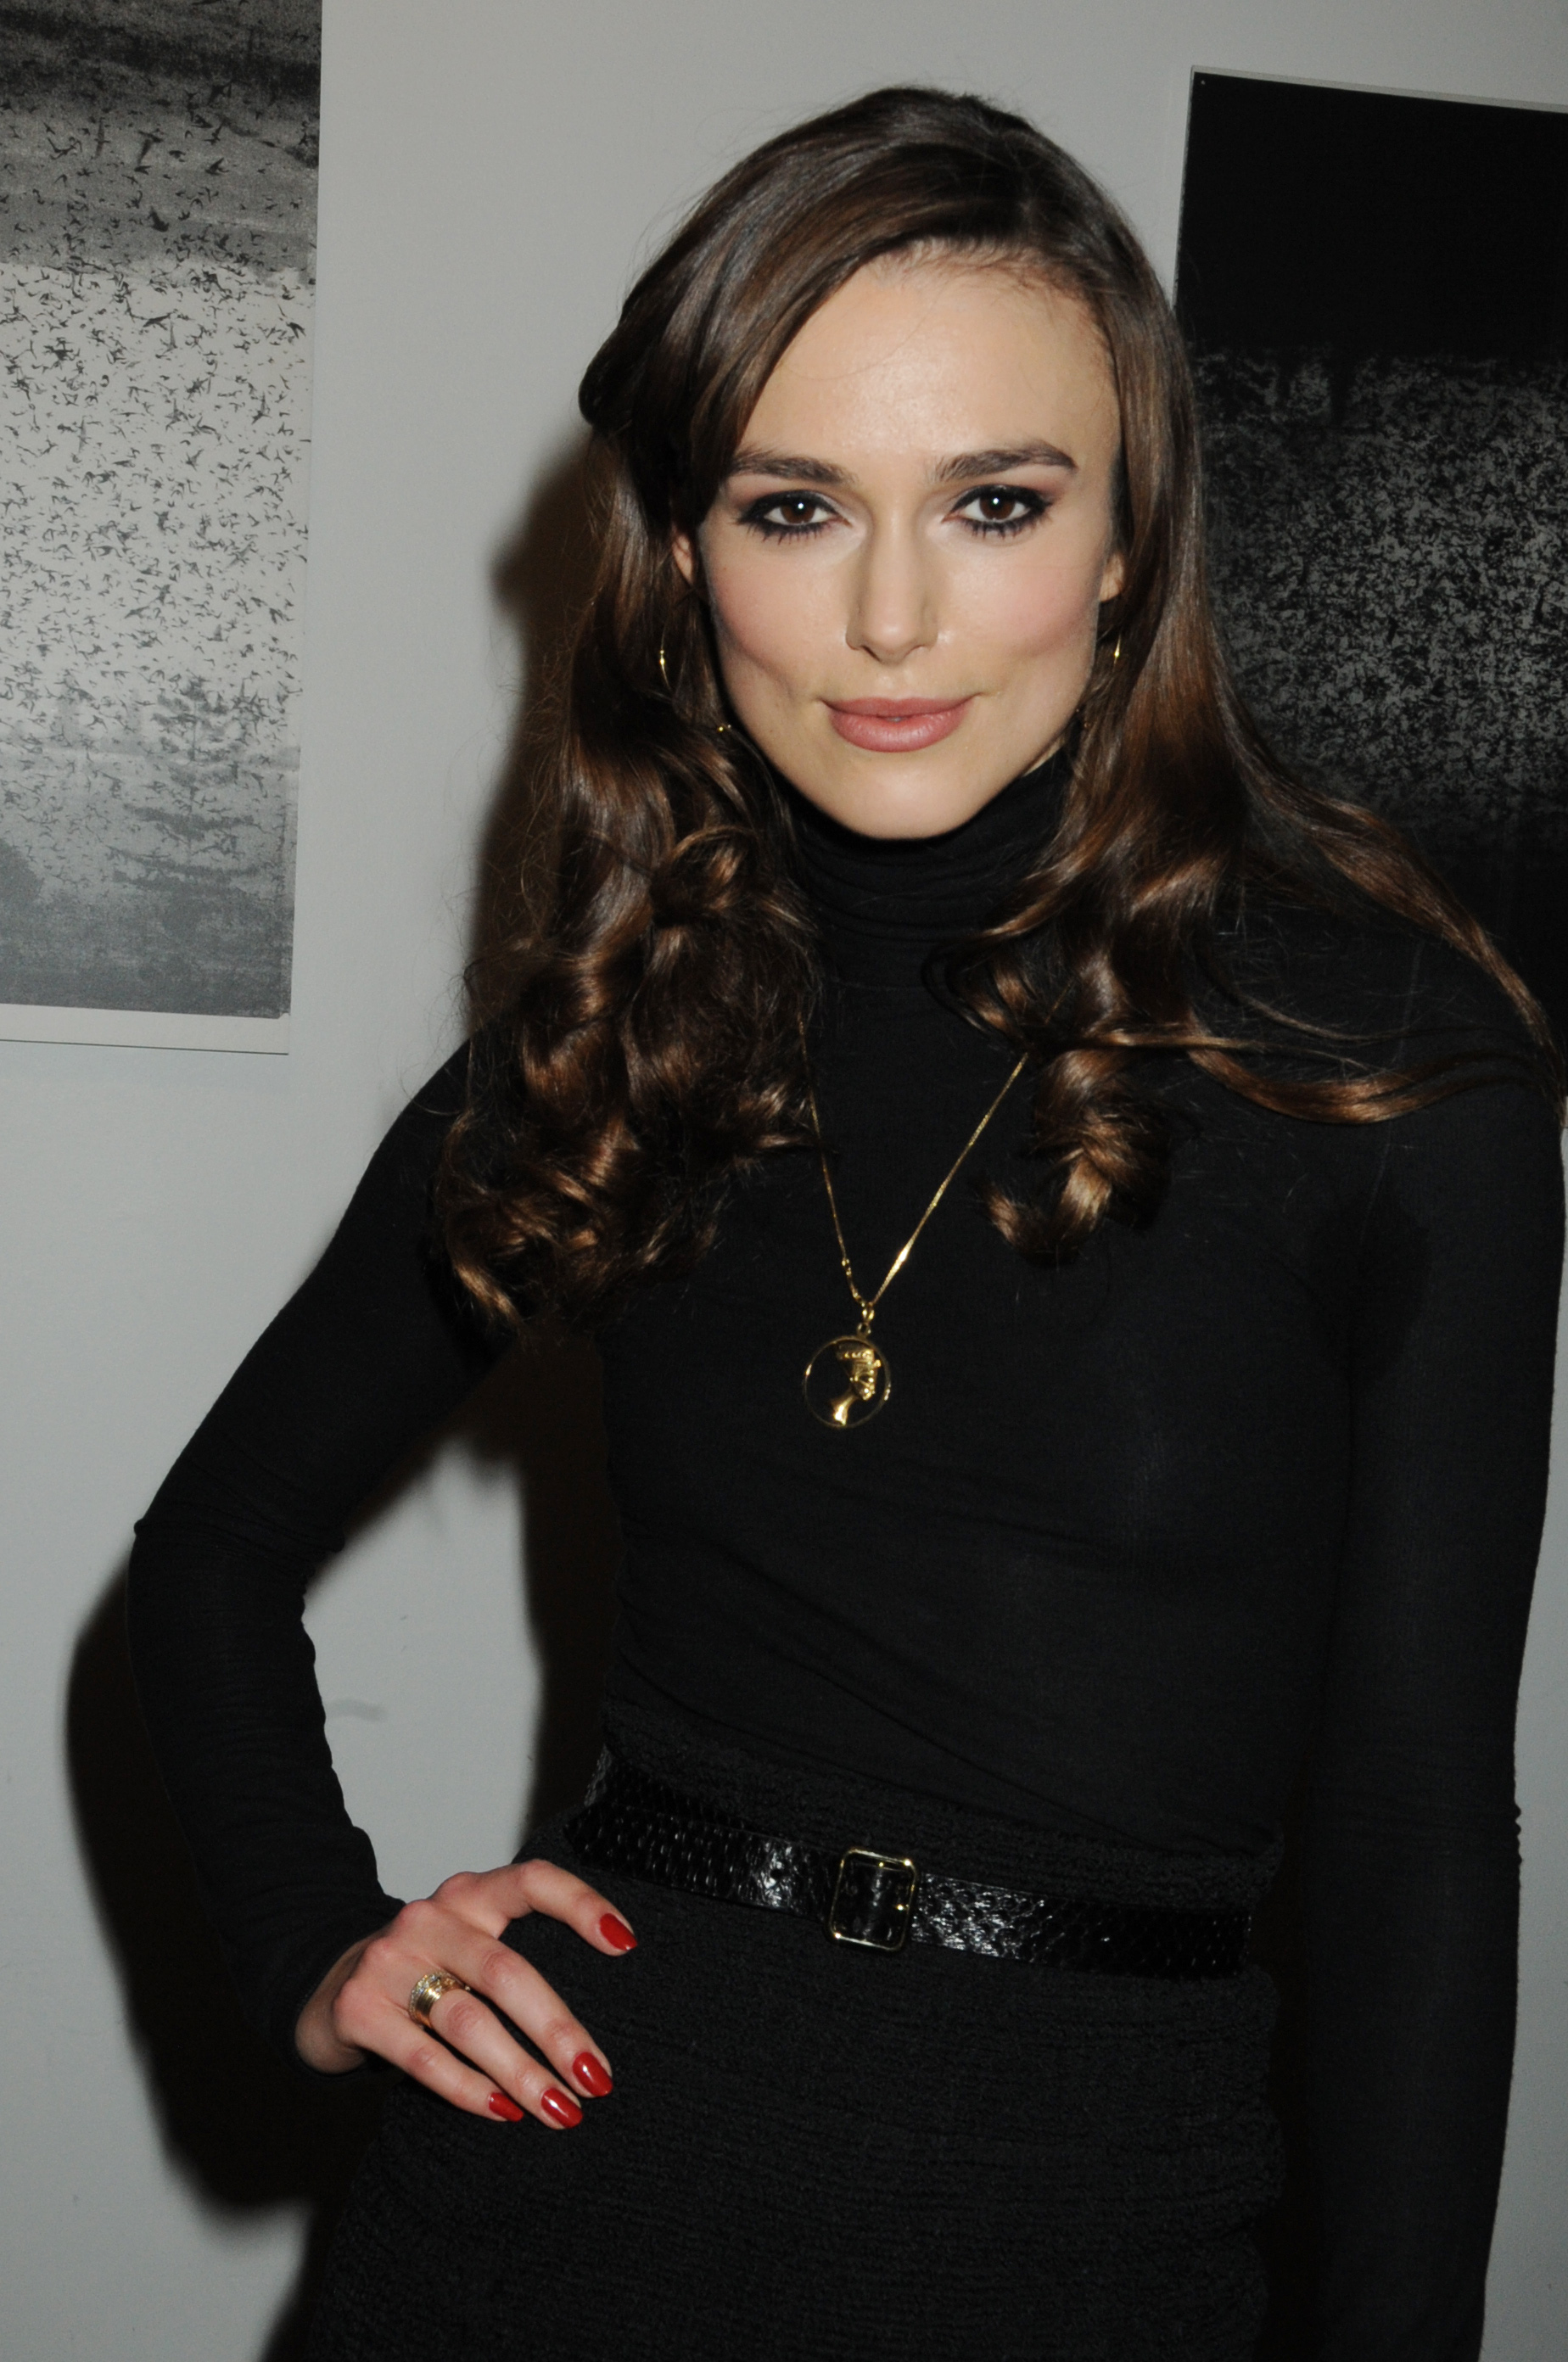 Keira Knightley attends the after party for "Little Dog Laughed" at the Trafalgar Hotel on January 20, 2010 in London, England. | Source: Getty Images